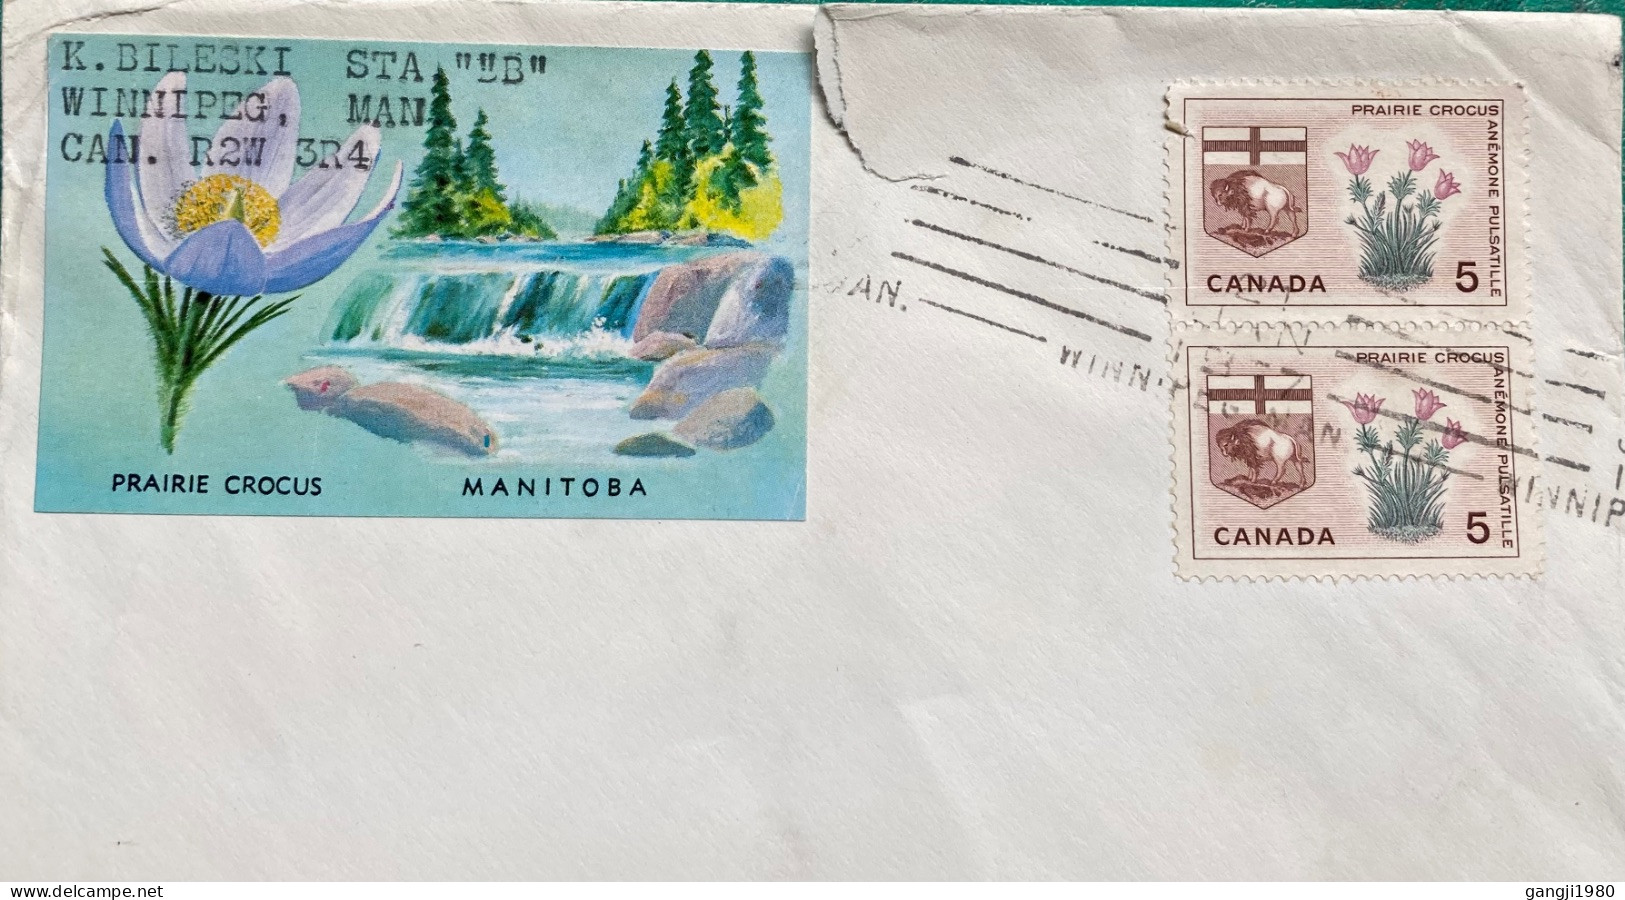 CANADA 1967, COVER USD TO USA, PROVINCE BADLE FLOWER, ANIMAL, NATURE, WATERFALL, 2 STAMP, WINNIPG CITY, BAR CANCEL. - Briefe U. Dokumente